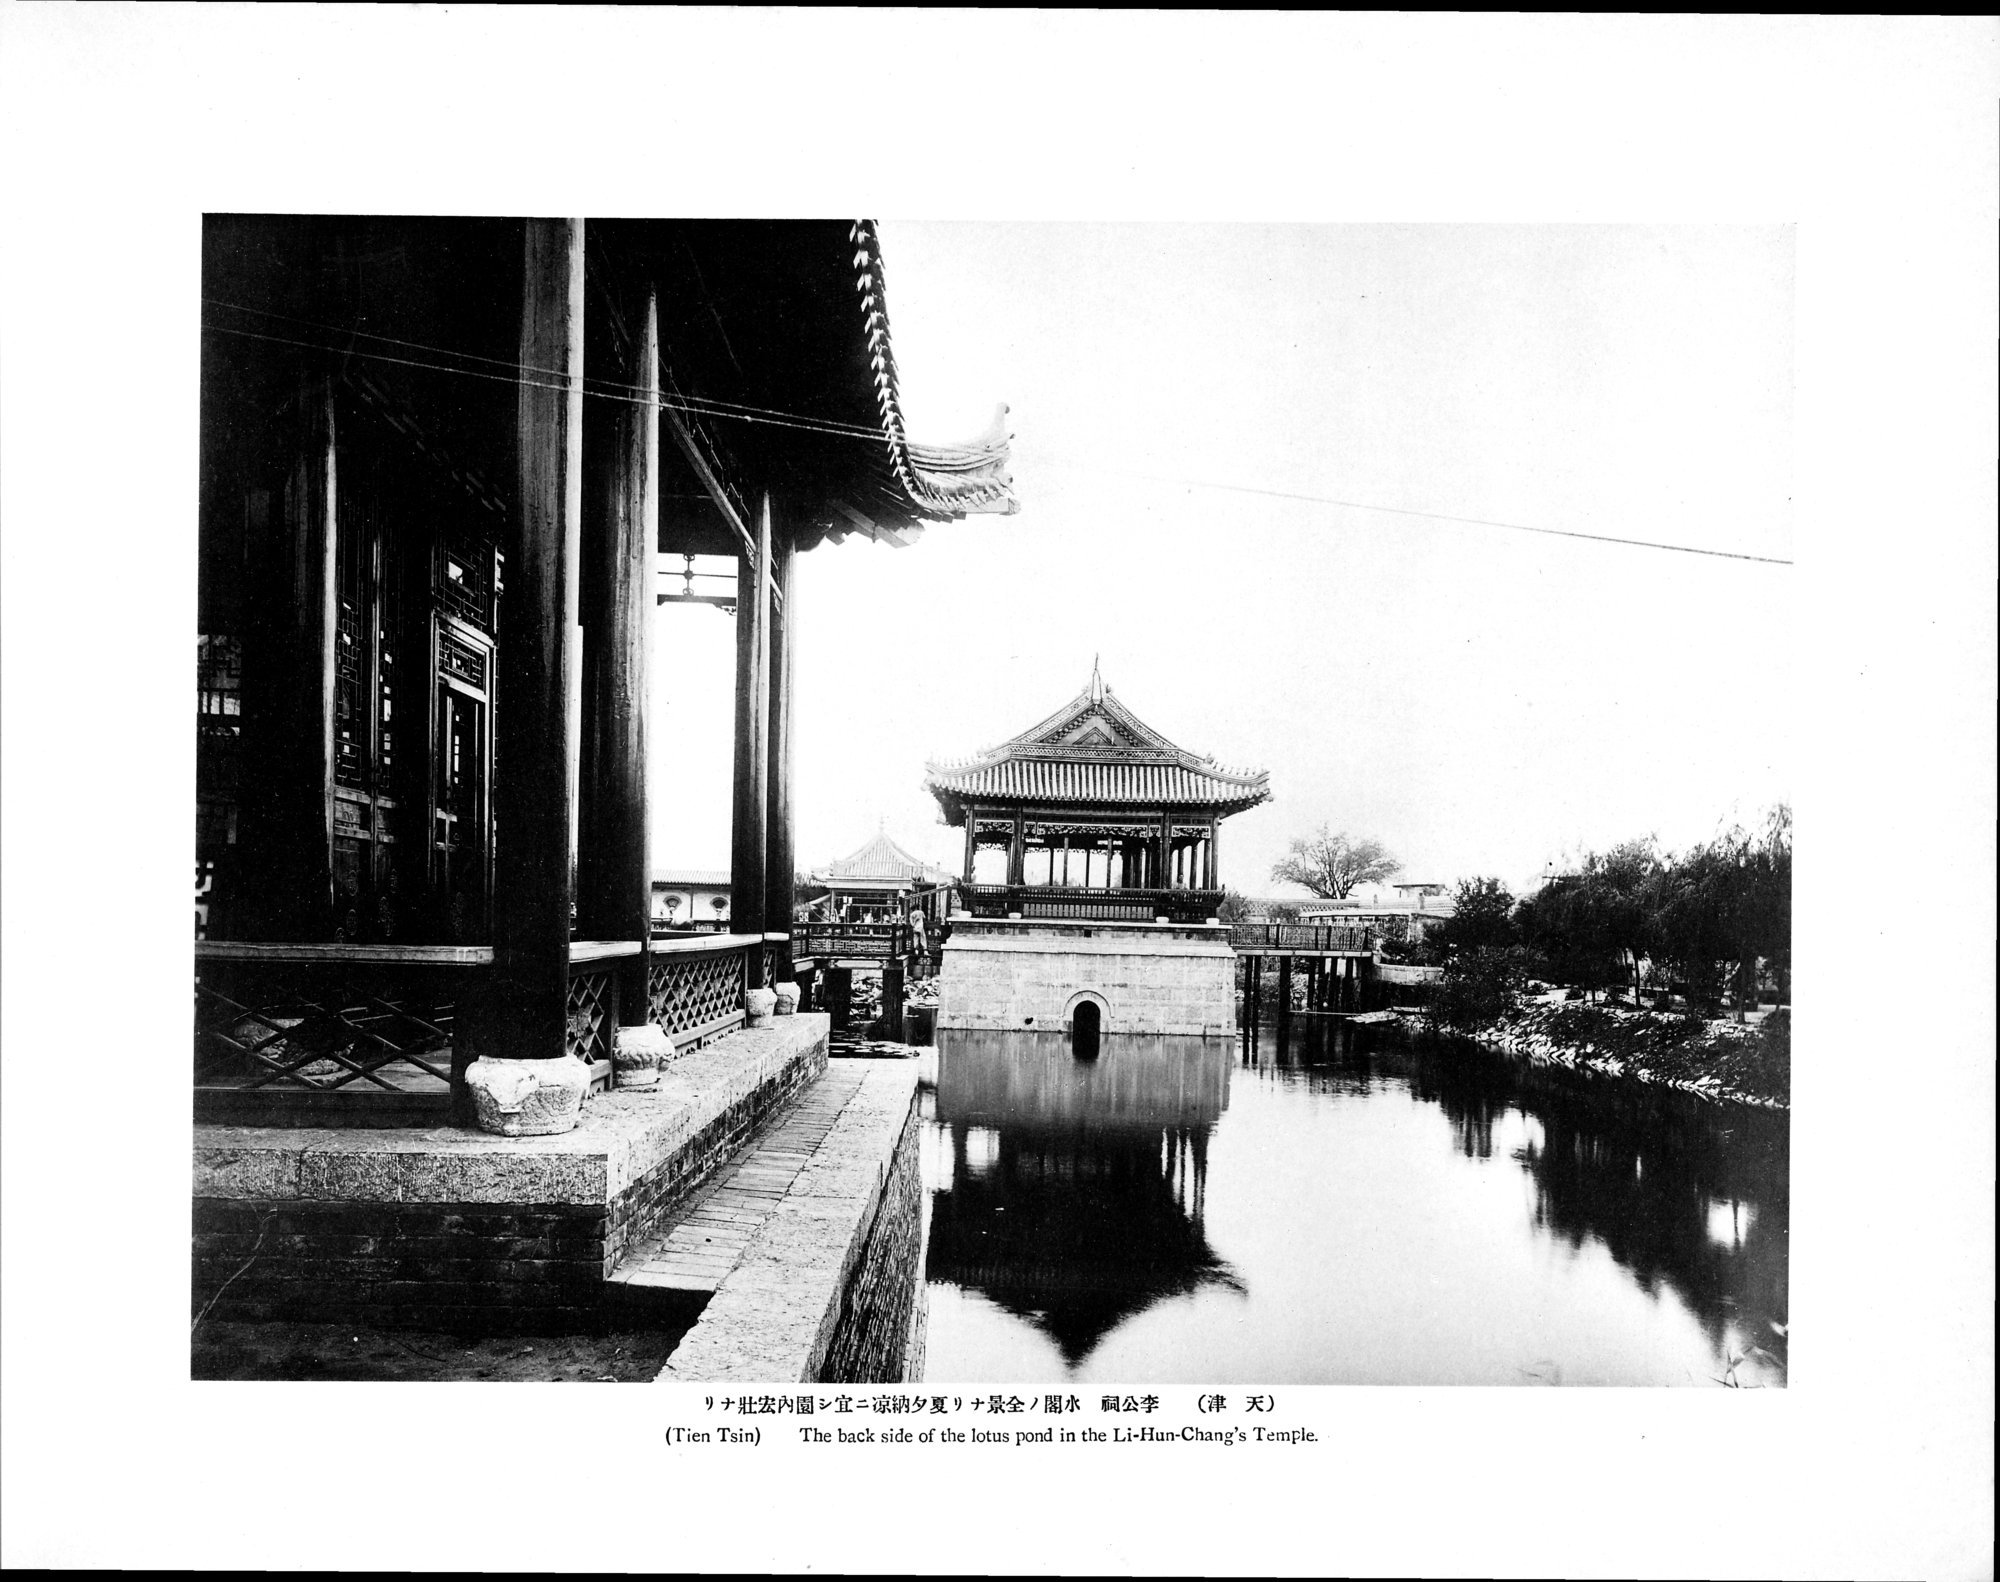 Views and Custom of North China : vol.1 / Page 63 (Grayscale High Resolution Image)